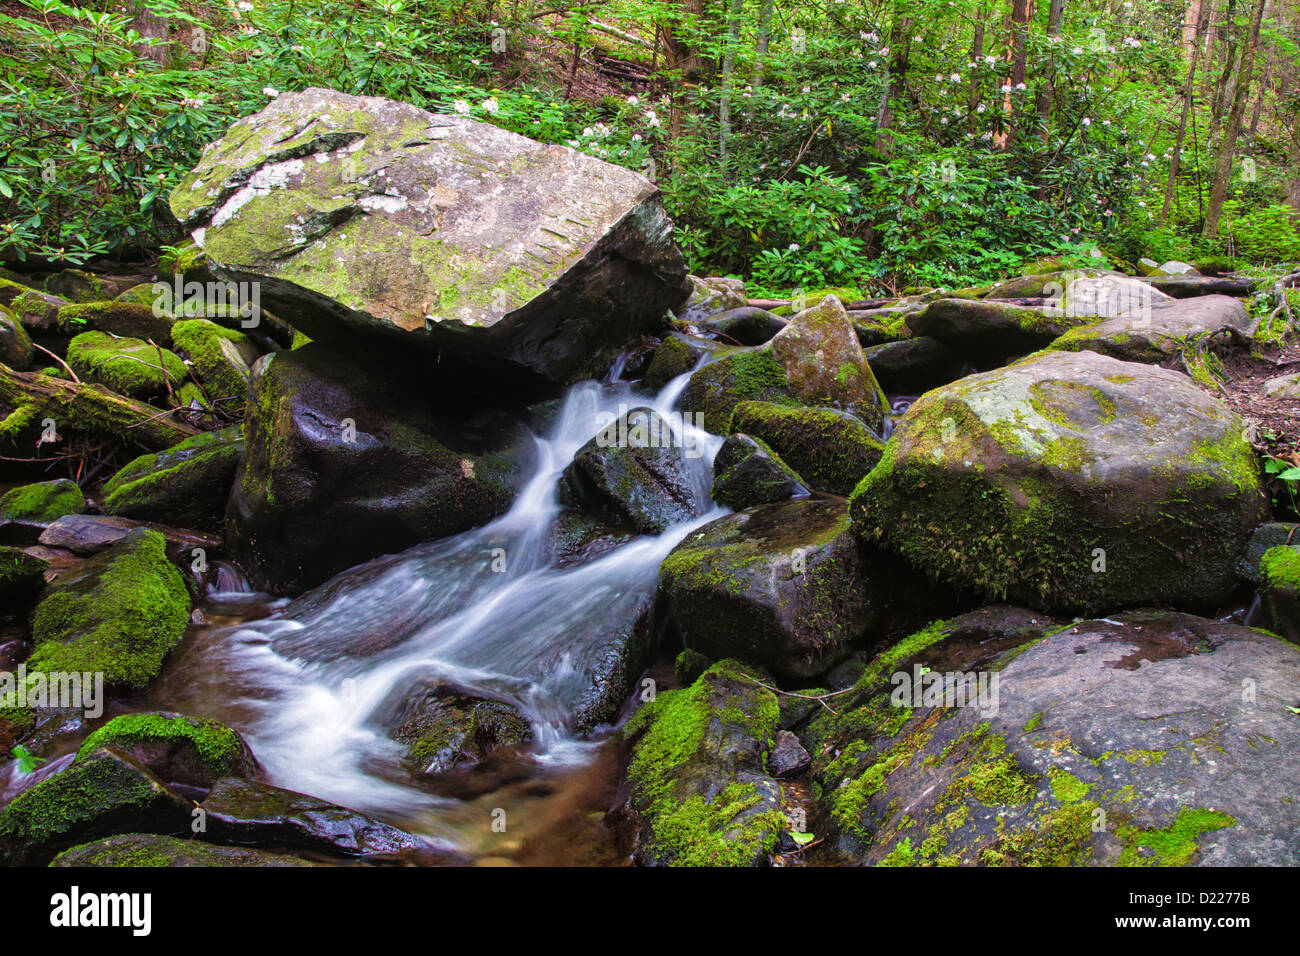 Water cascades over rocks in a stream bed in the Smoky Mountains. Stock Photo